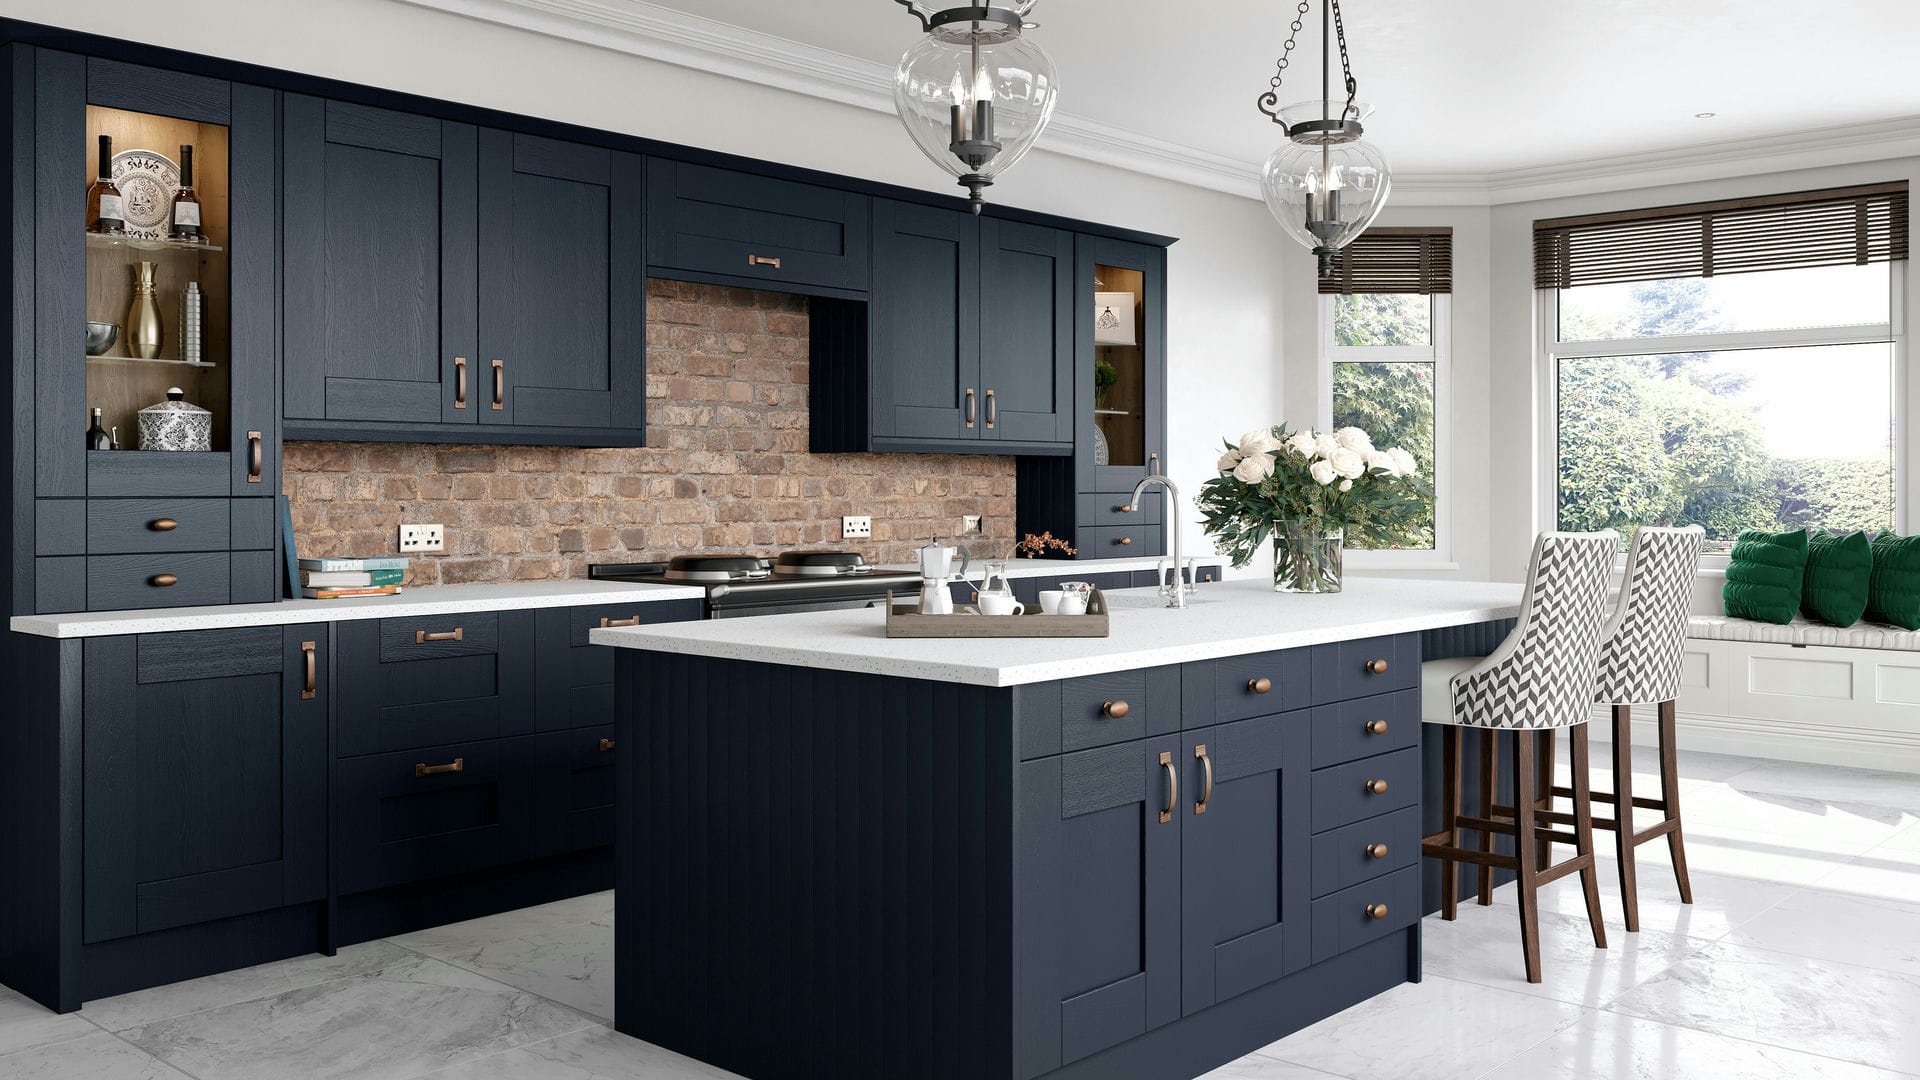 Luxury Shaker Midnight Blue kitchens offering a luxe, deep blue shade that echoes the sophistication of midnight